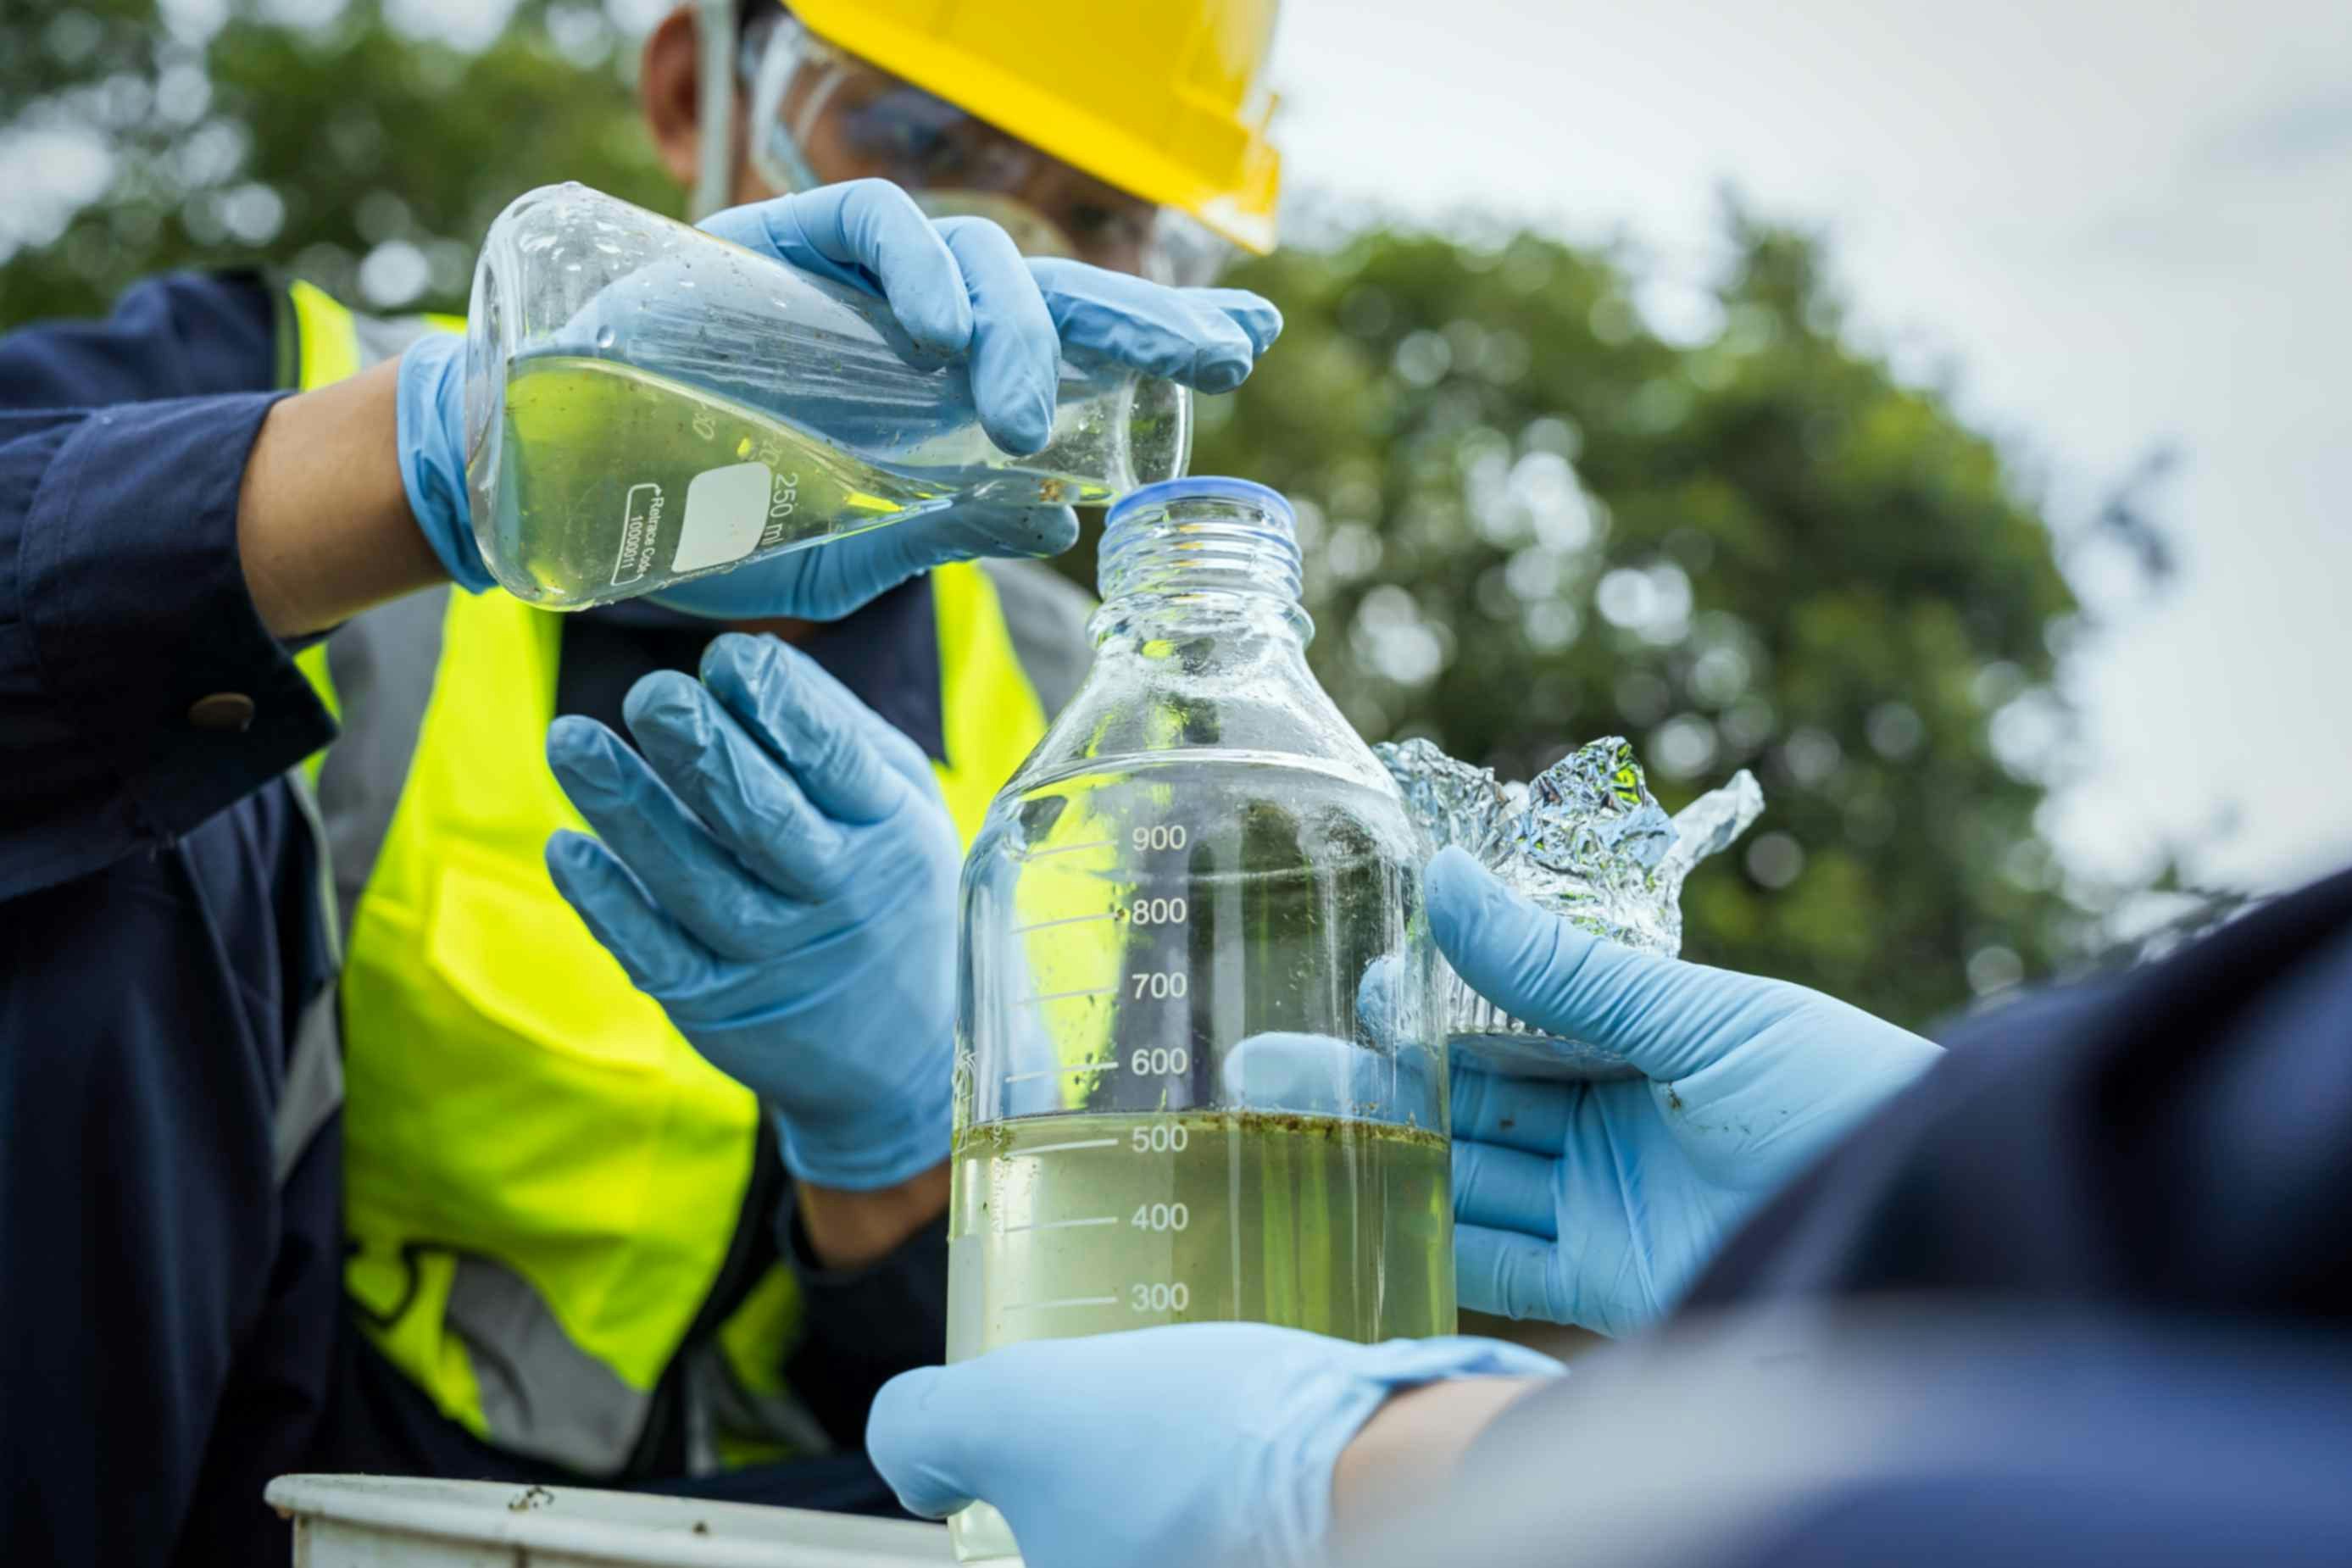 A man in ppe pouring liquid into a glass bottle